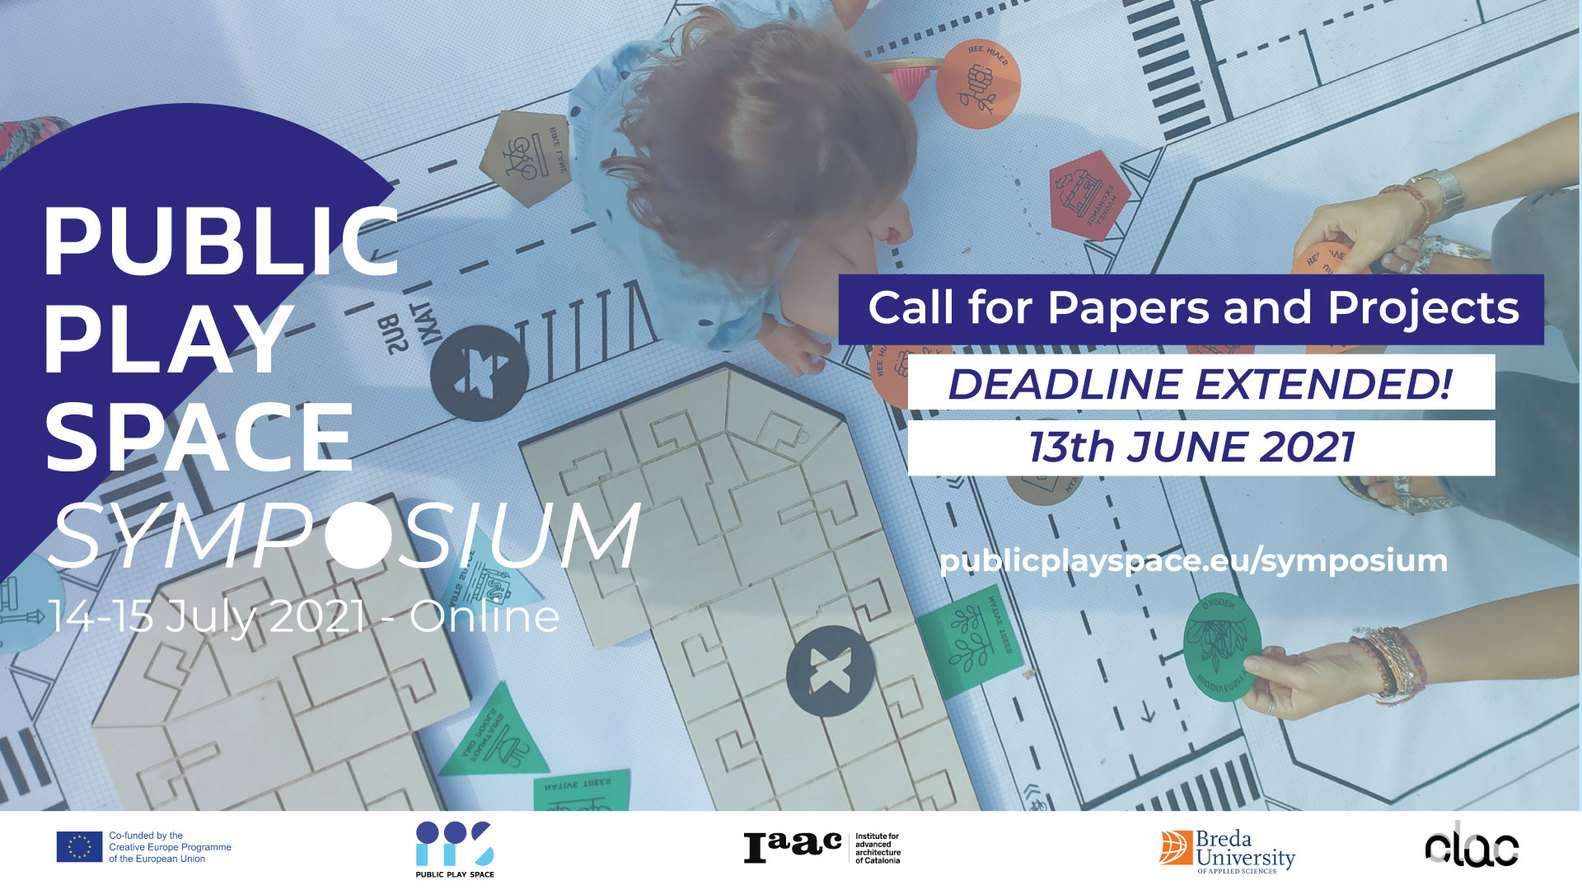 EXTENDED DEADLINE – CALL FOR PAPERS